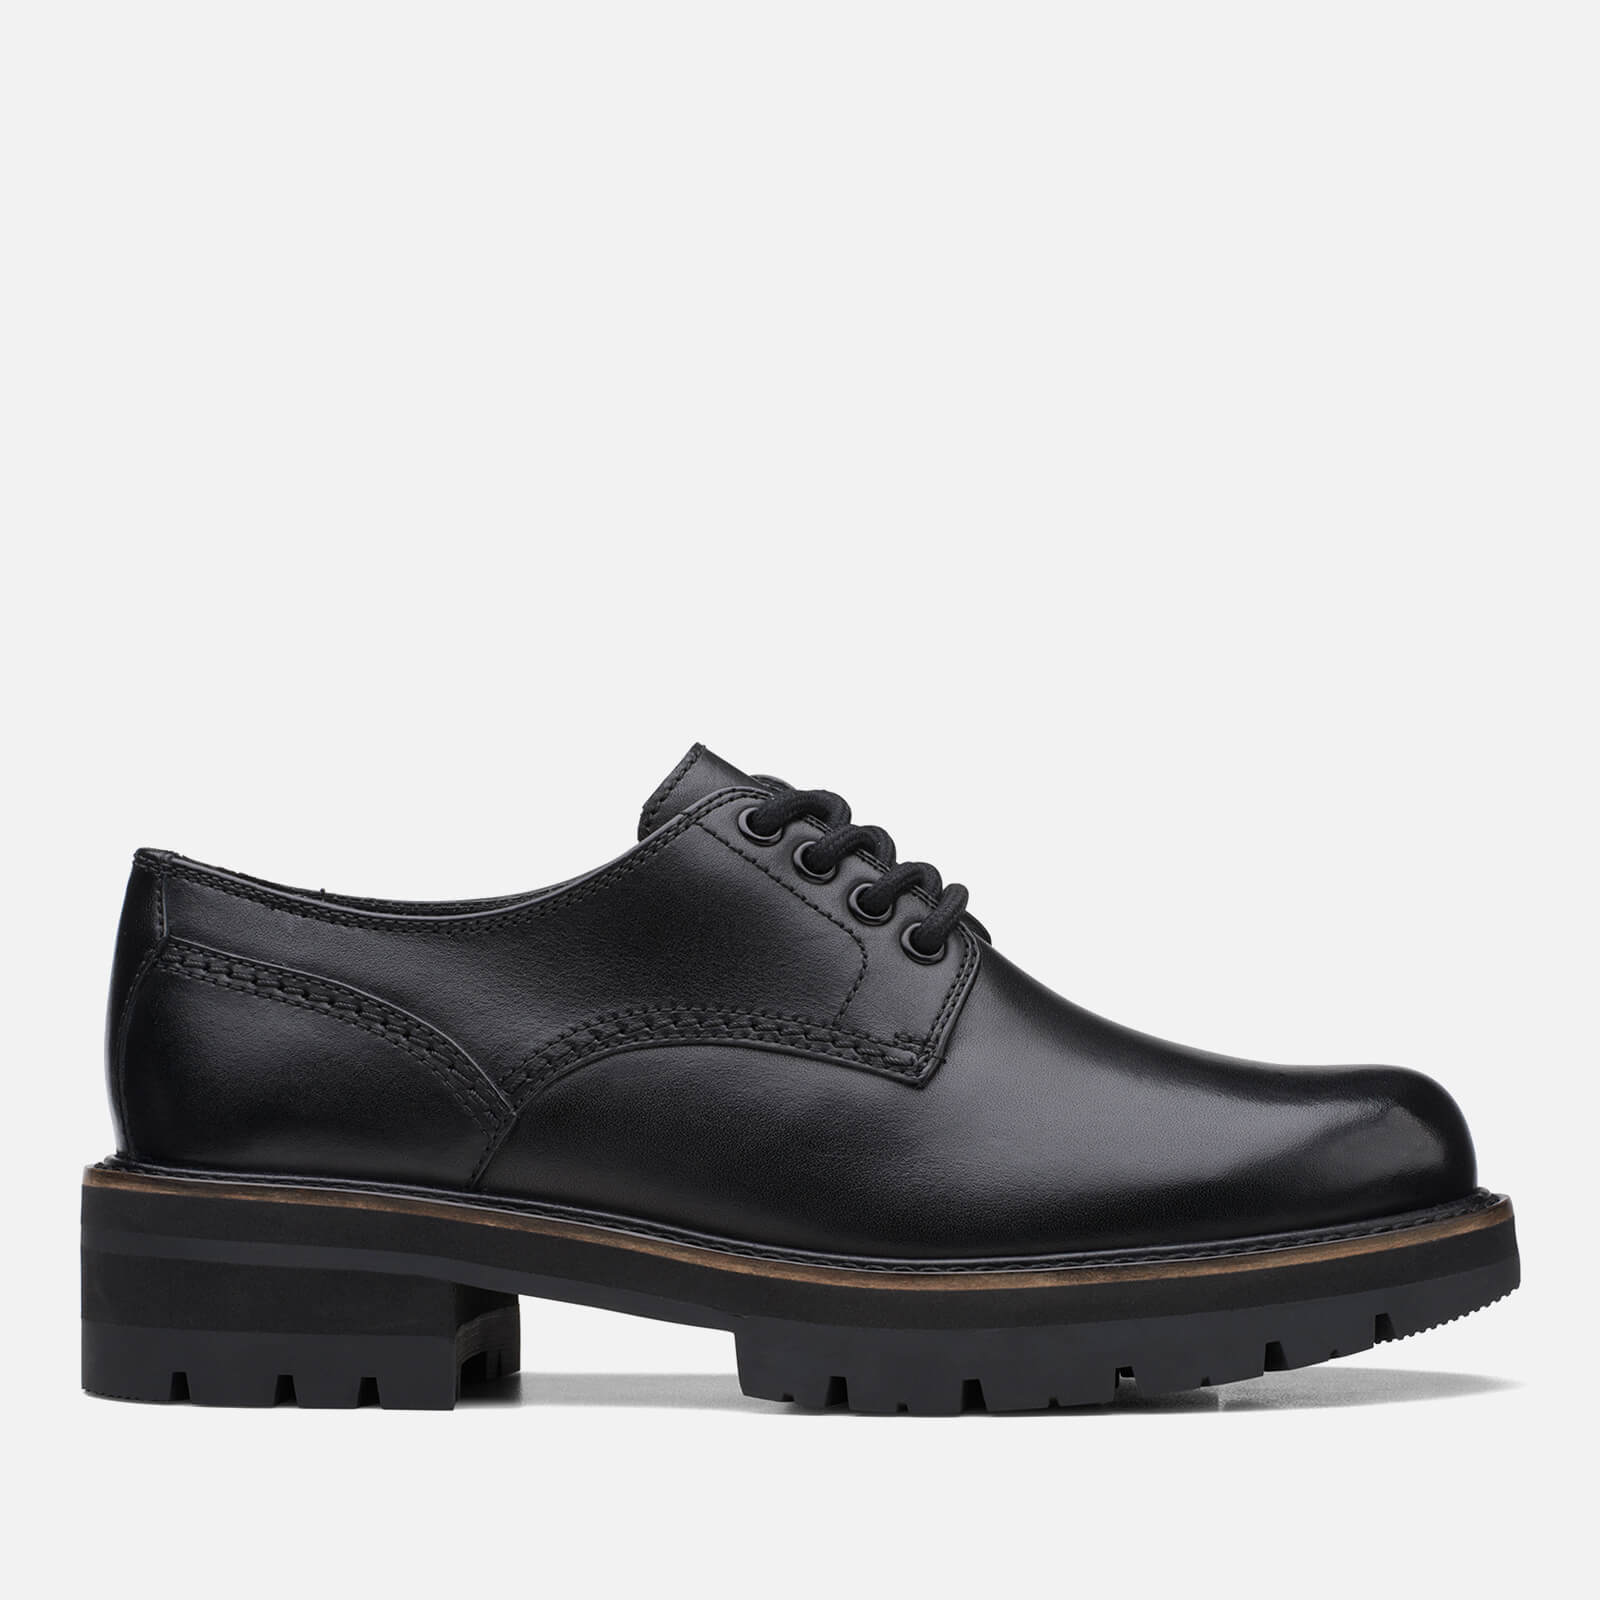 Clarks Women’s Orianna Derby Leather Shoes